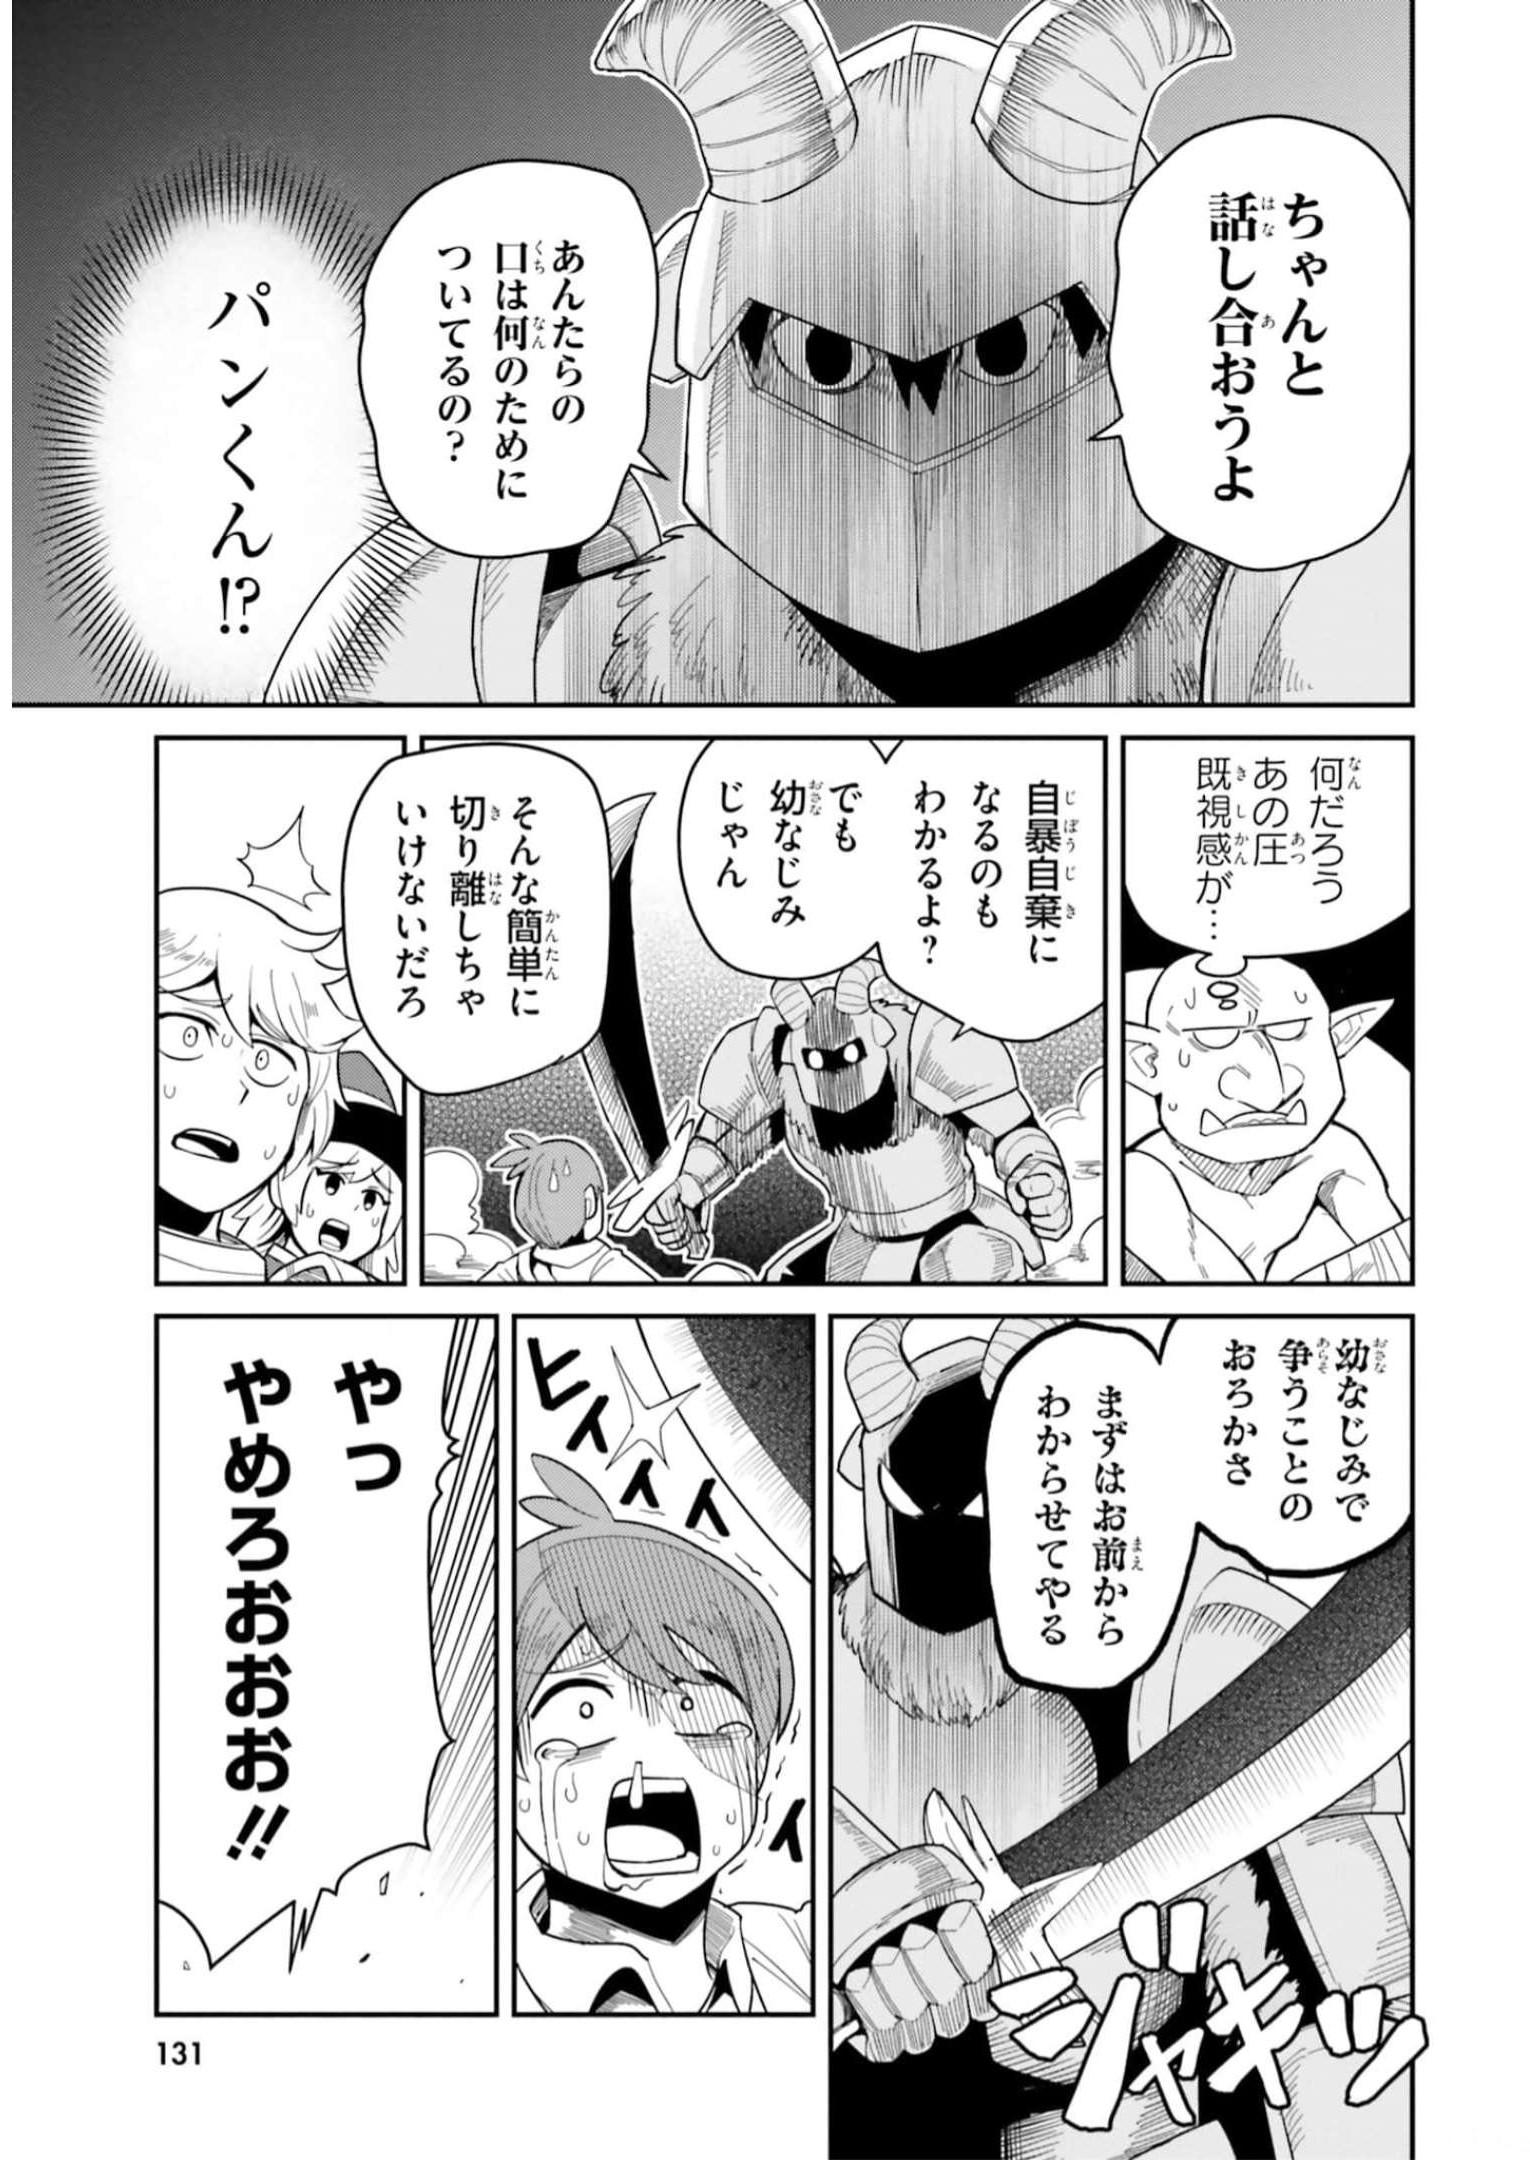 Dungeon Friends Forever Dungeon's Childhood Friend ダンジョンの幼なじみ 第25話 - Page 15